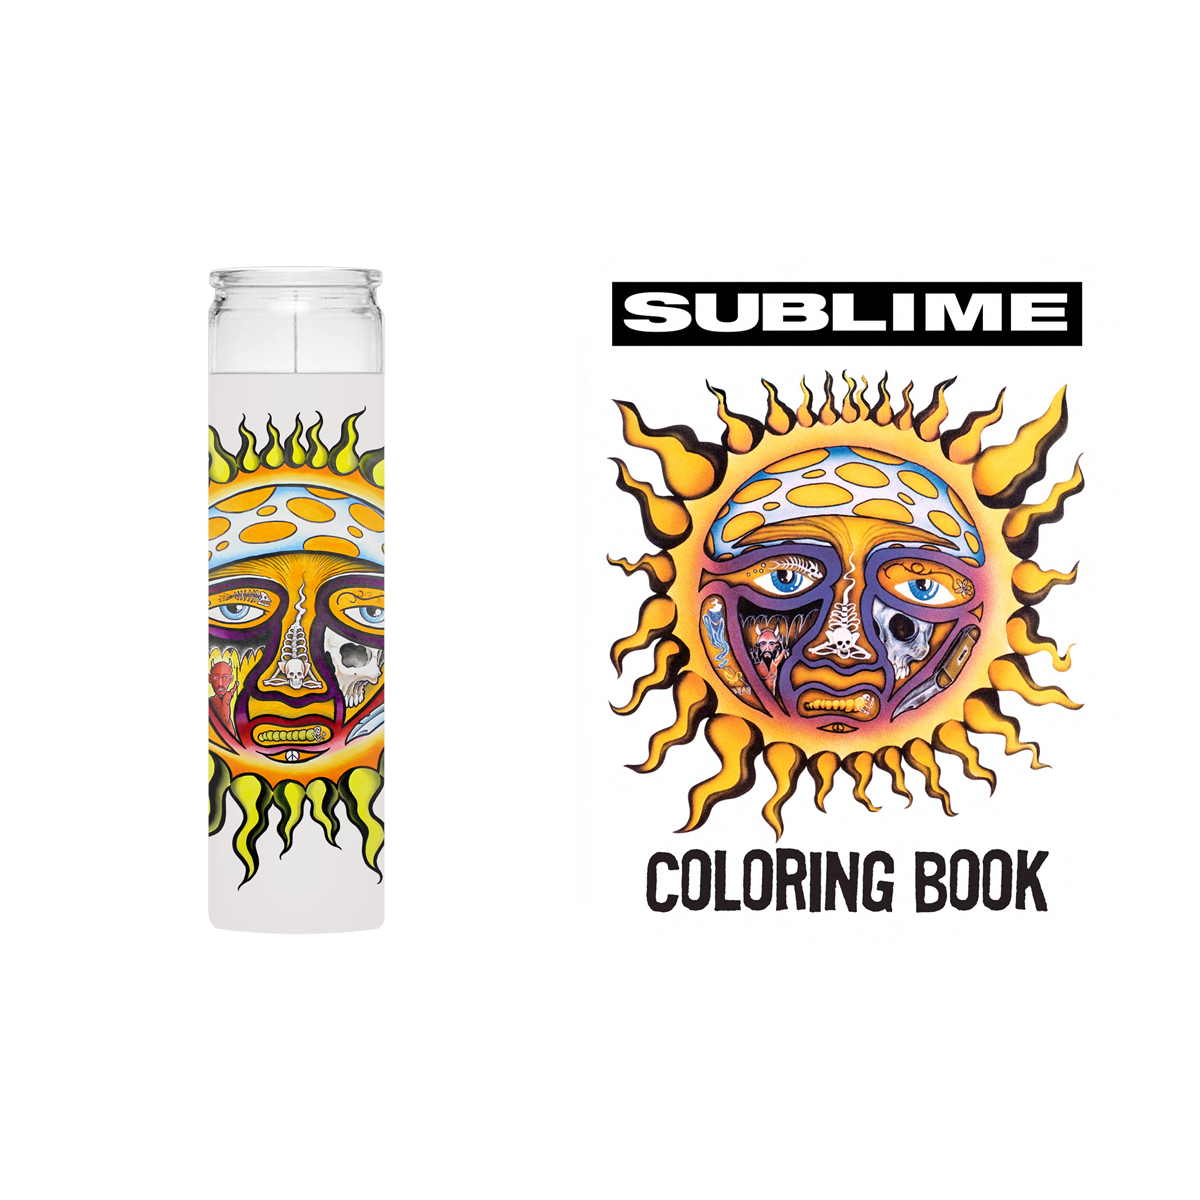 Candle + Coloring Book – Sublime